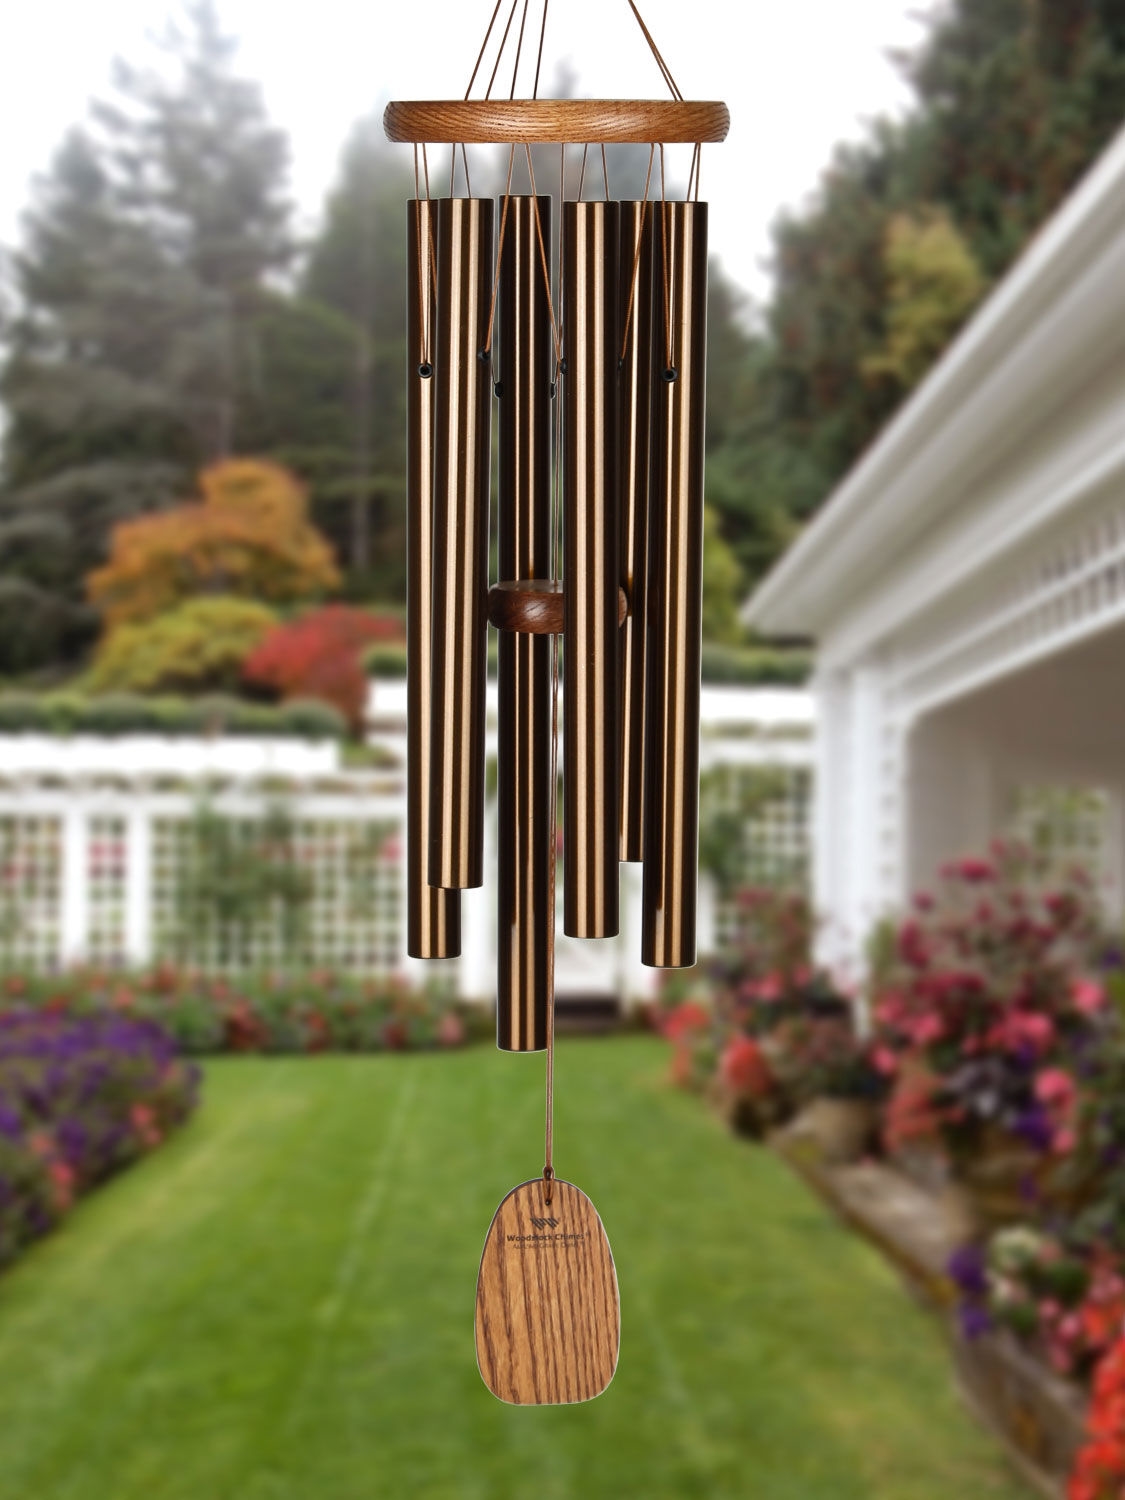 6 Hollow Aluminum Metal Tubes Music Windchime Patio and Home Decoration 28 Amazing Grace Wind Chimes for Outdoor Garden MeeDoo Beautiful Music Tune Wind Chimes Yark 